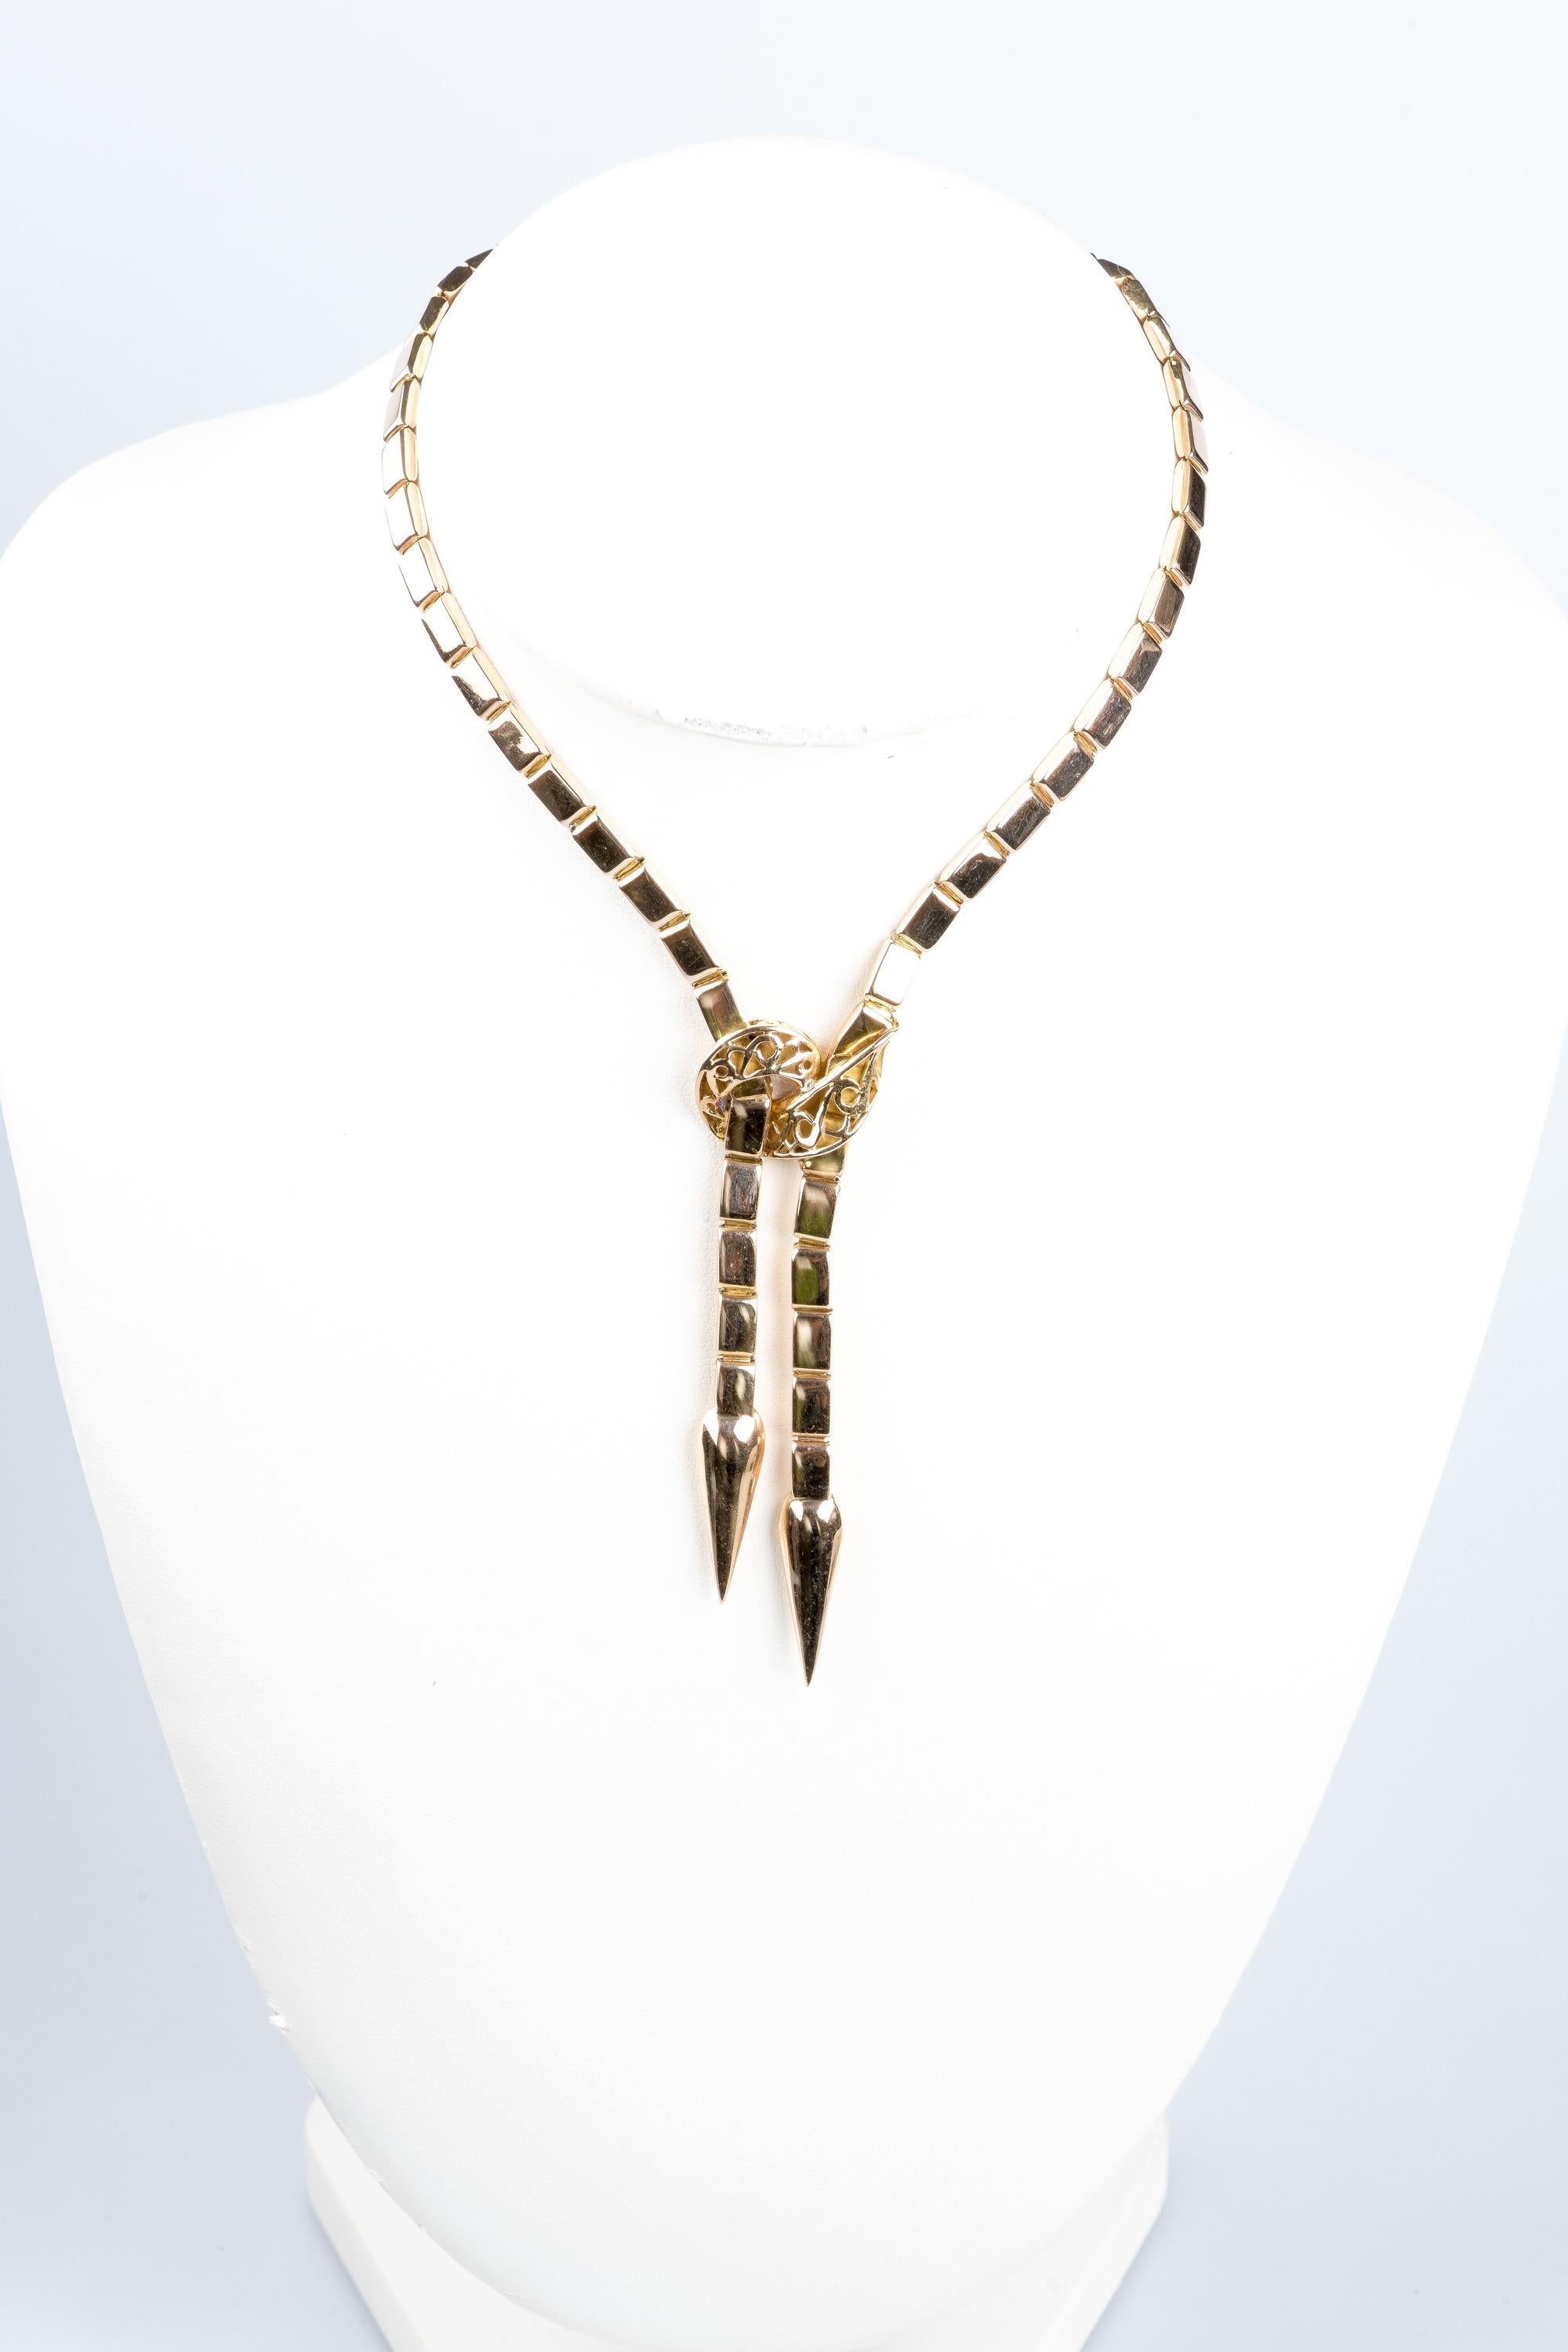 18K yellow gold snake style necklace.
The necklace and composed of a chain in flat mesh.  This necklace is worked in a unique way and the details and its atypical design give it a lot of originality. Ideal to be worn on any occasion to add elegance